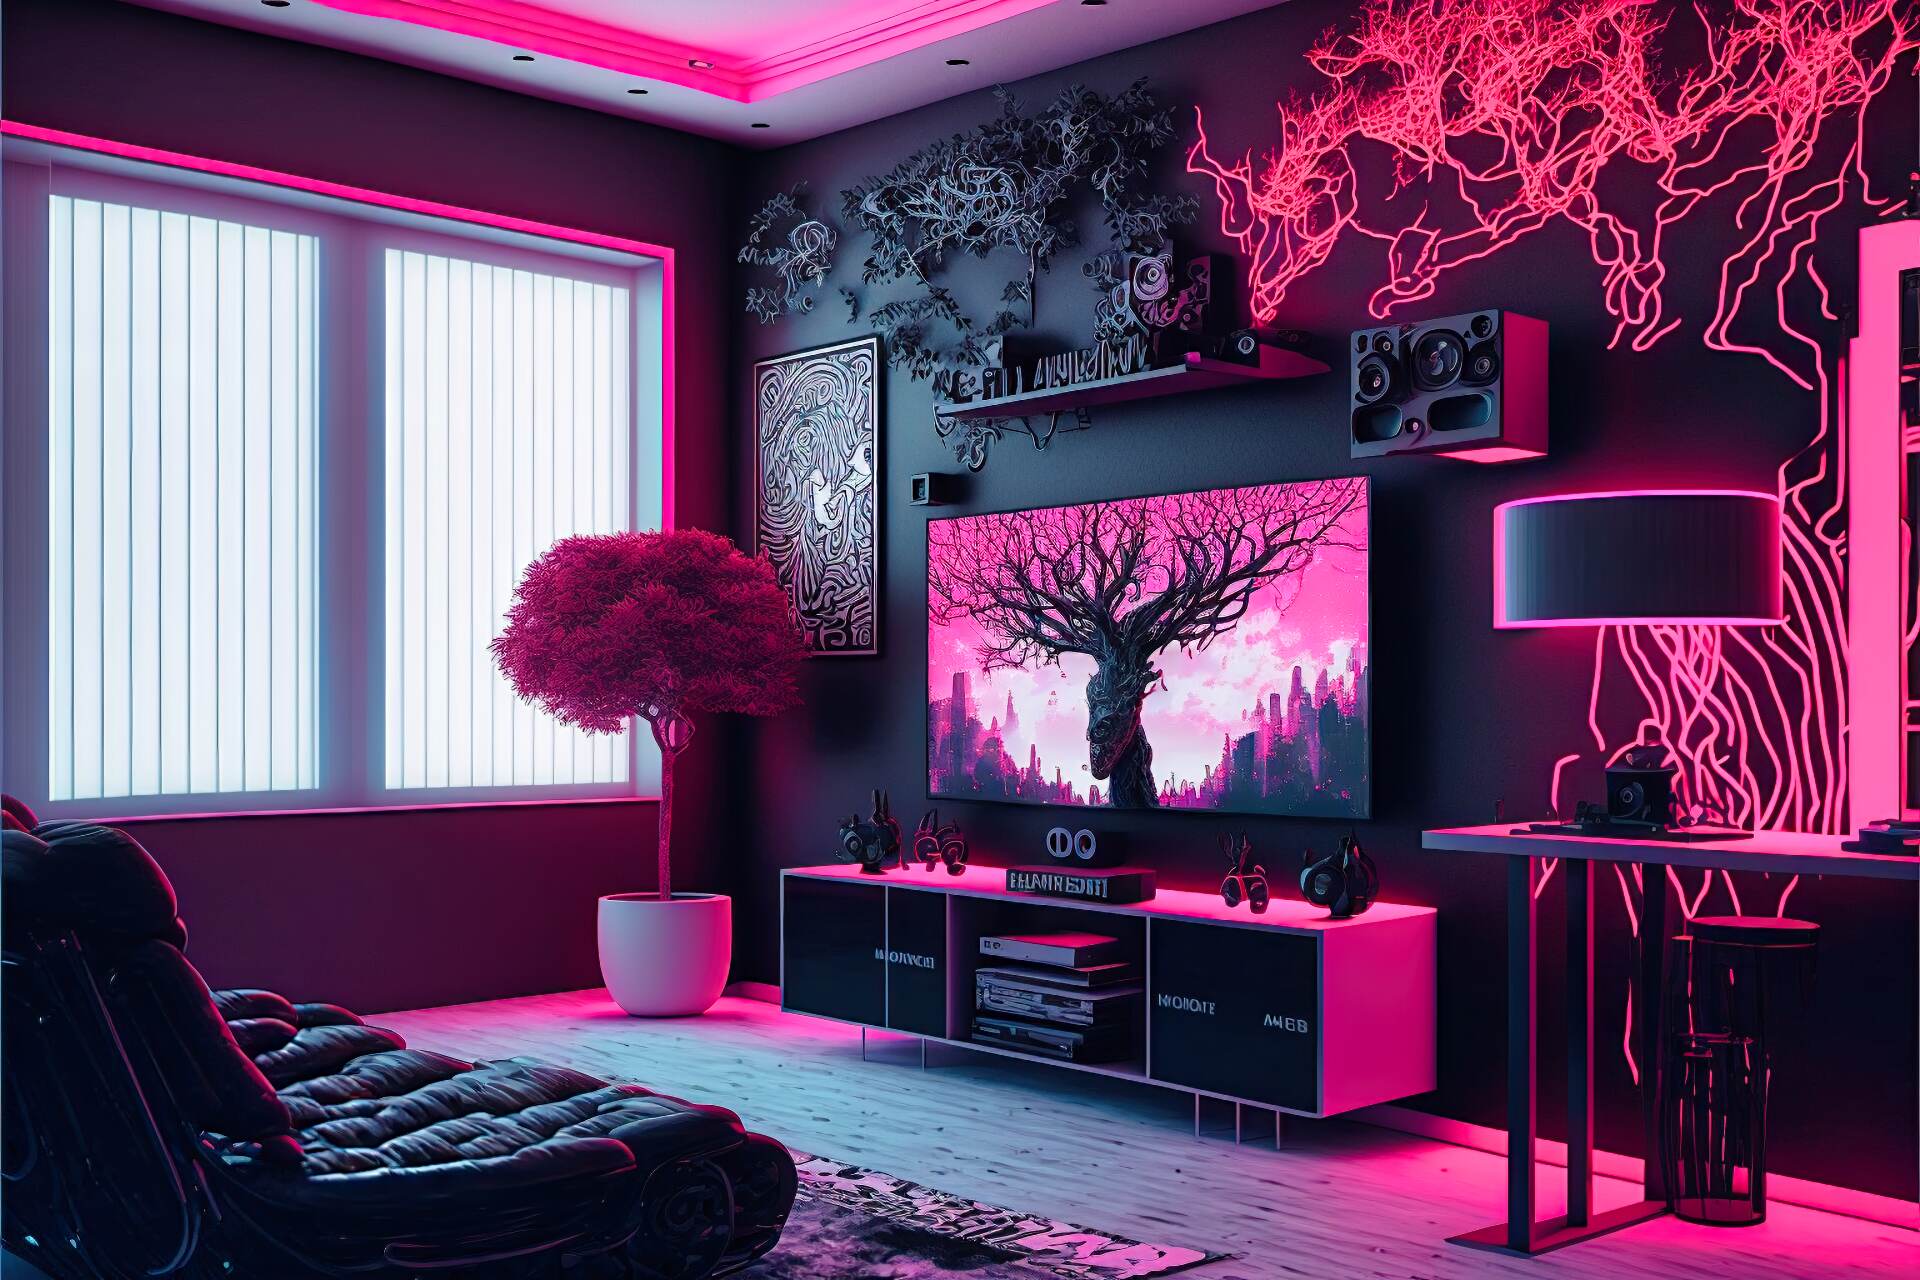 A Cyberpunk-Style Living Room With A Neon Dream Vibe. The Walls Are Painted Black And Adorned With Neon Lights In Various Shades Of Pink. The Furniture Is Made Up Of Sleek And Modern Pieces In A Monochromatic Color Scheme Of Black And White. A Large Flat Screen Tv Is Mounted On The Wall, Surrounded By More Neon Lights. A High-Tech Sound System And A Virtual Reality Gaming Console Complete The Look.